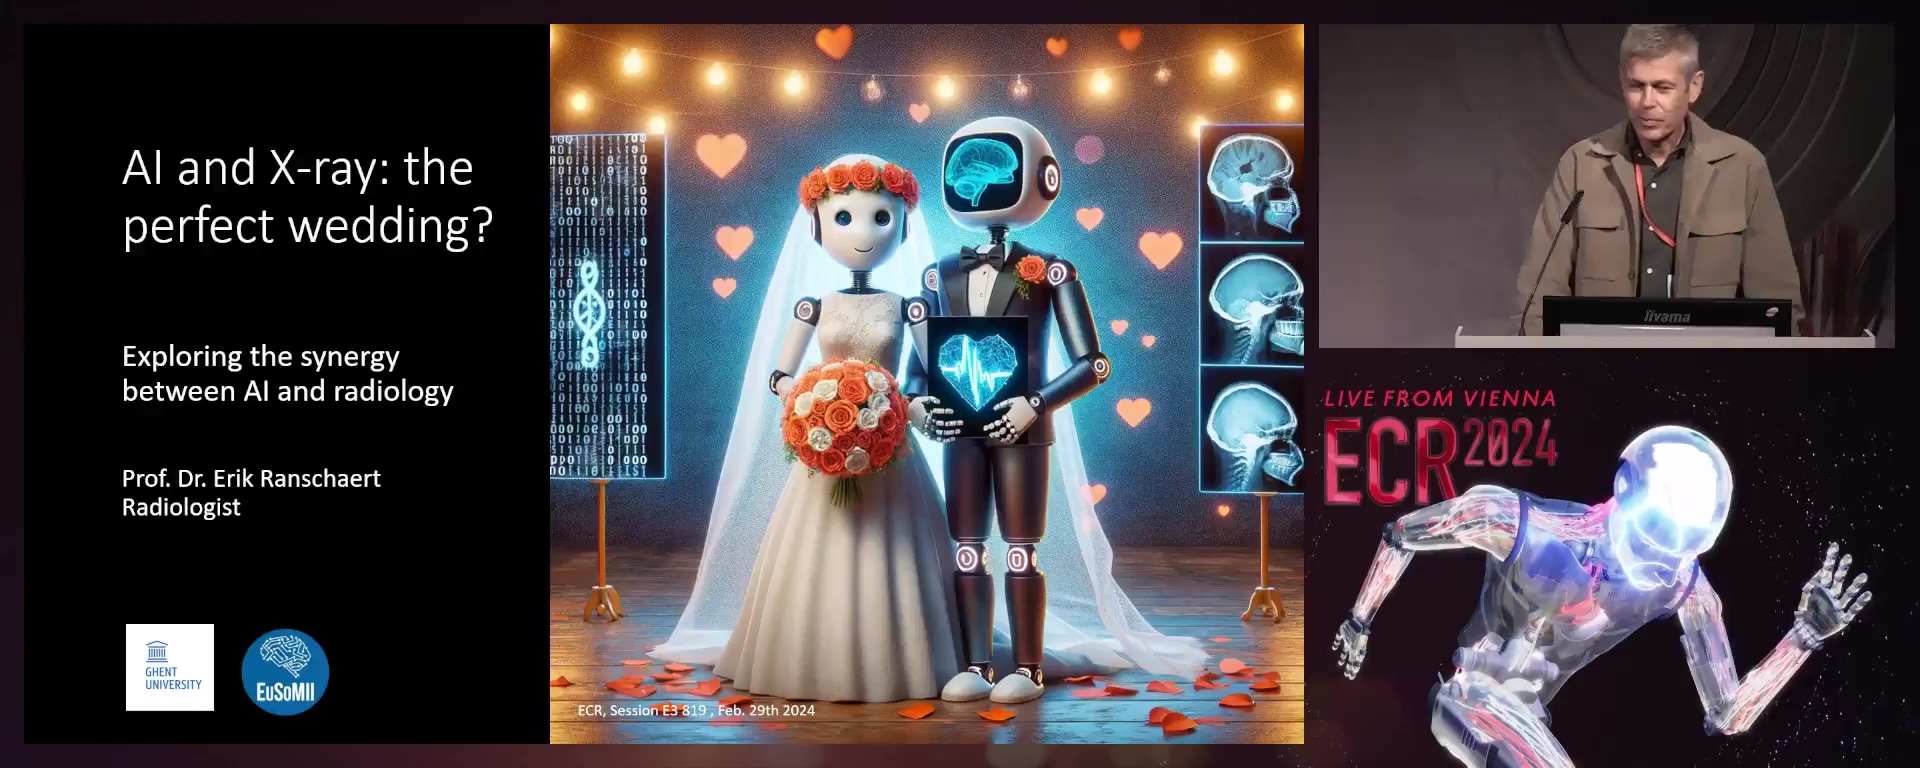 AI and x-ray: the perfect wedding?